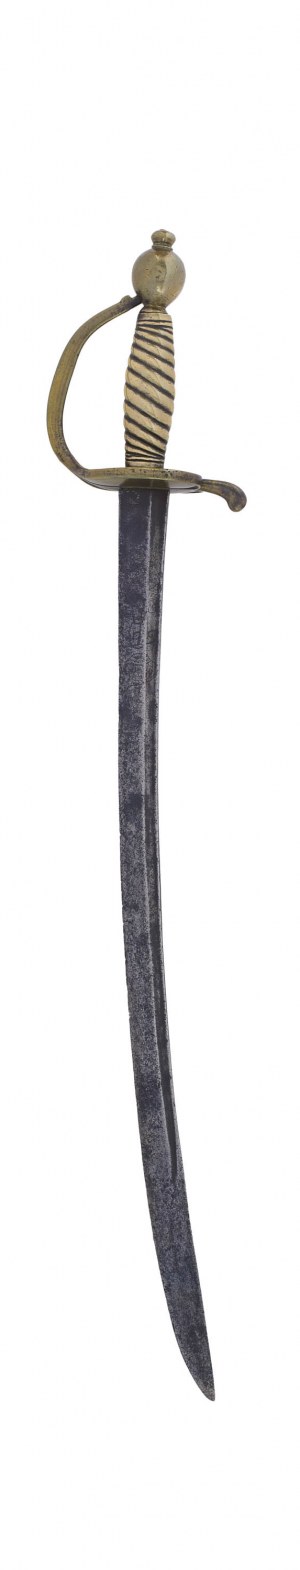 Infantry cleaver, Prussia, circa 1800.